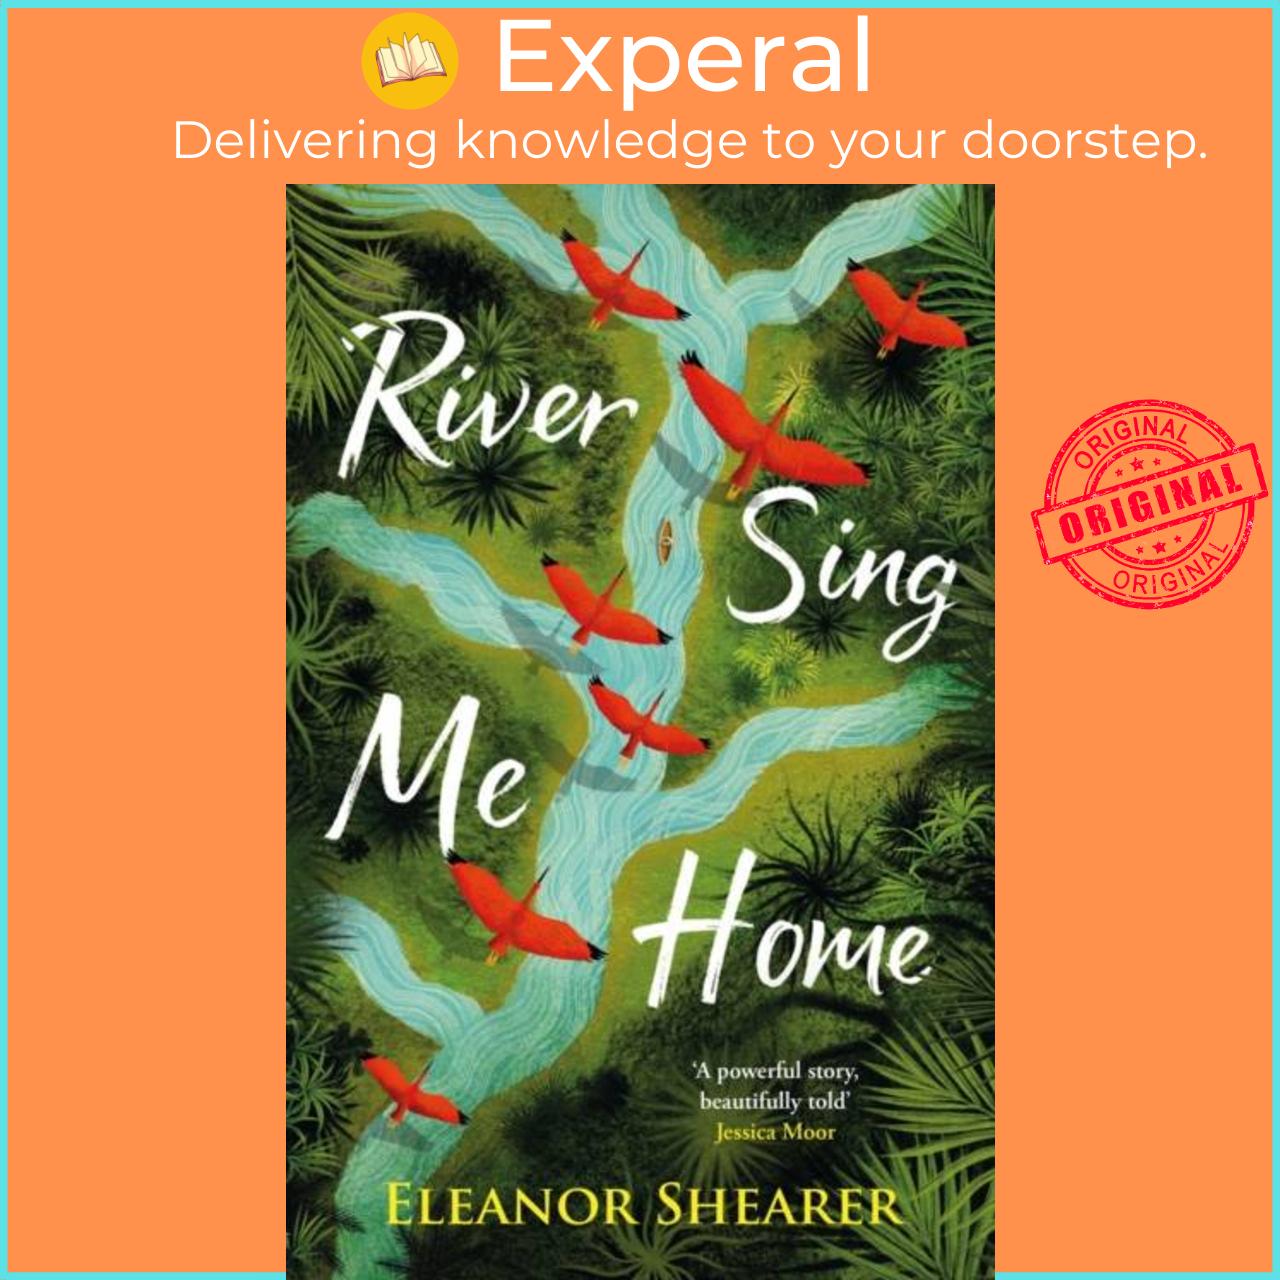 Hình ảnh Sách - River Sing Me Home - A beautiful novel of courage, hope and finding fa by Eleanor Shearer (UK edition, hardcover)